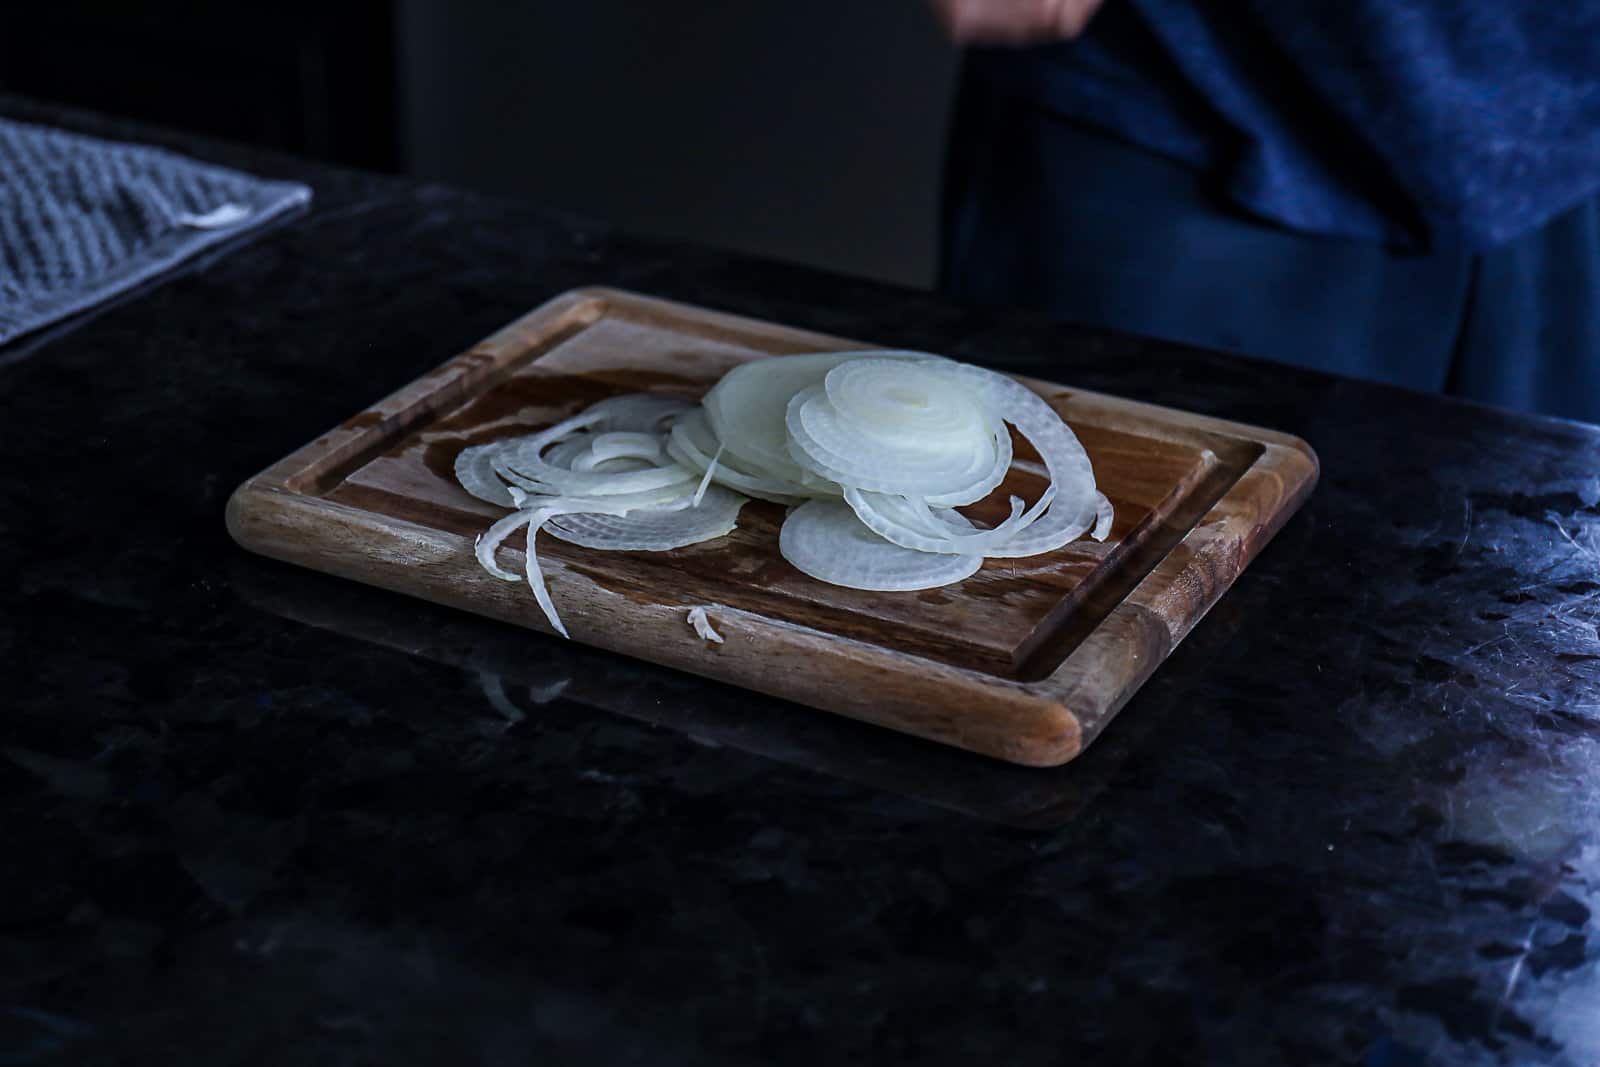 Recipe step demonstrating how to cut onions for smash burgers